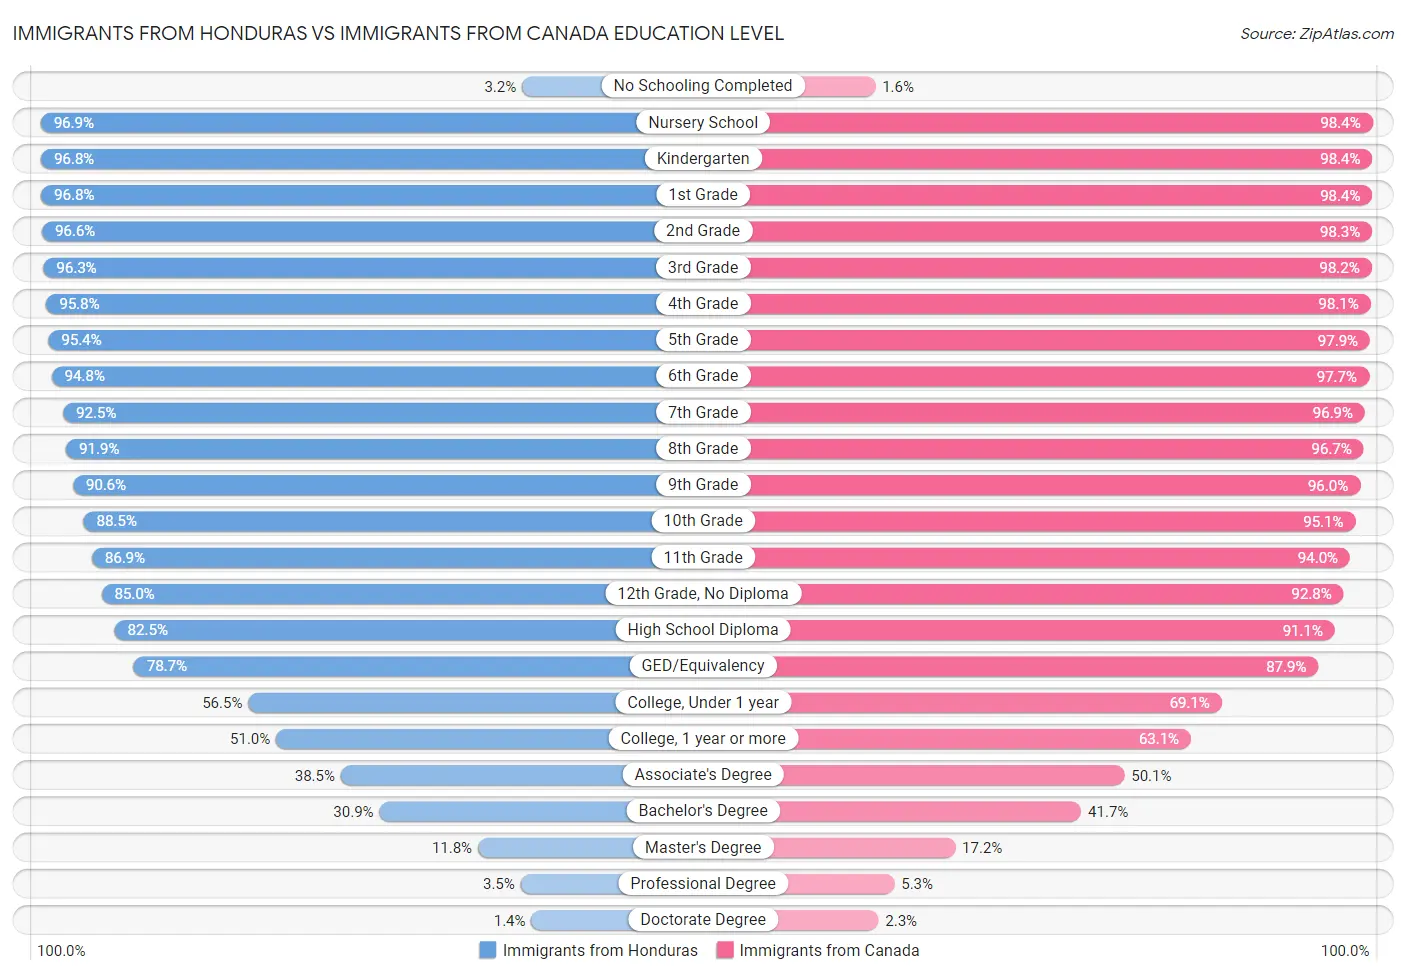 Immigrants from Honduras vs Immigrants from Canada Education Level